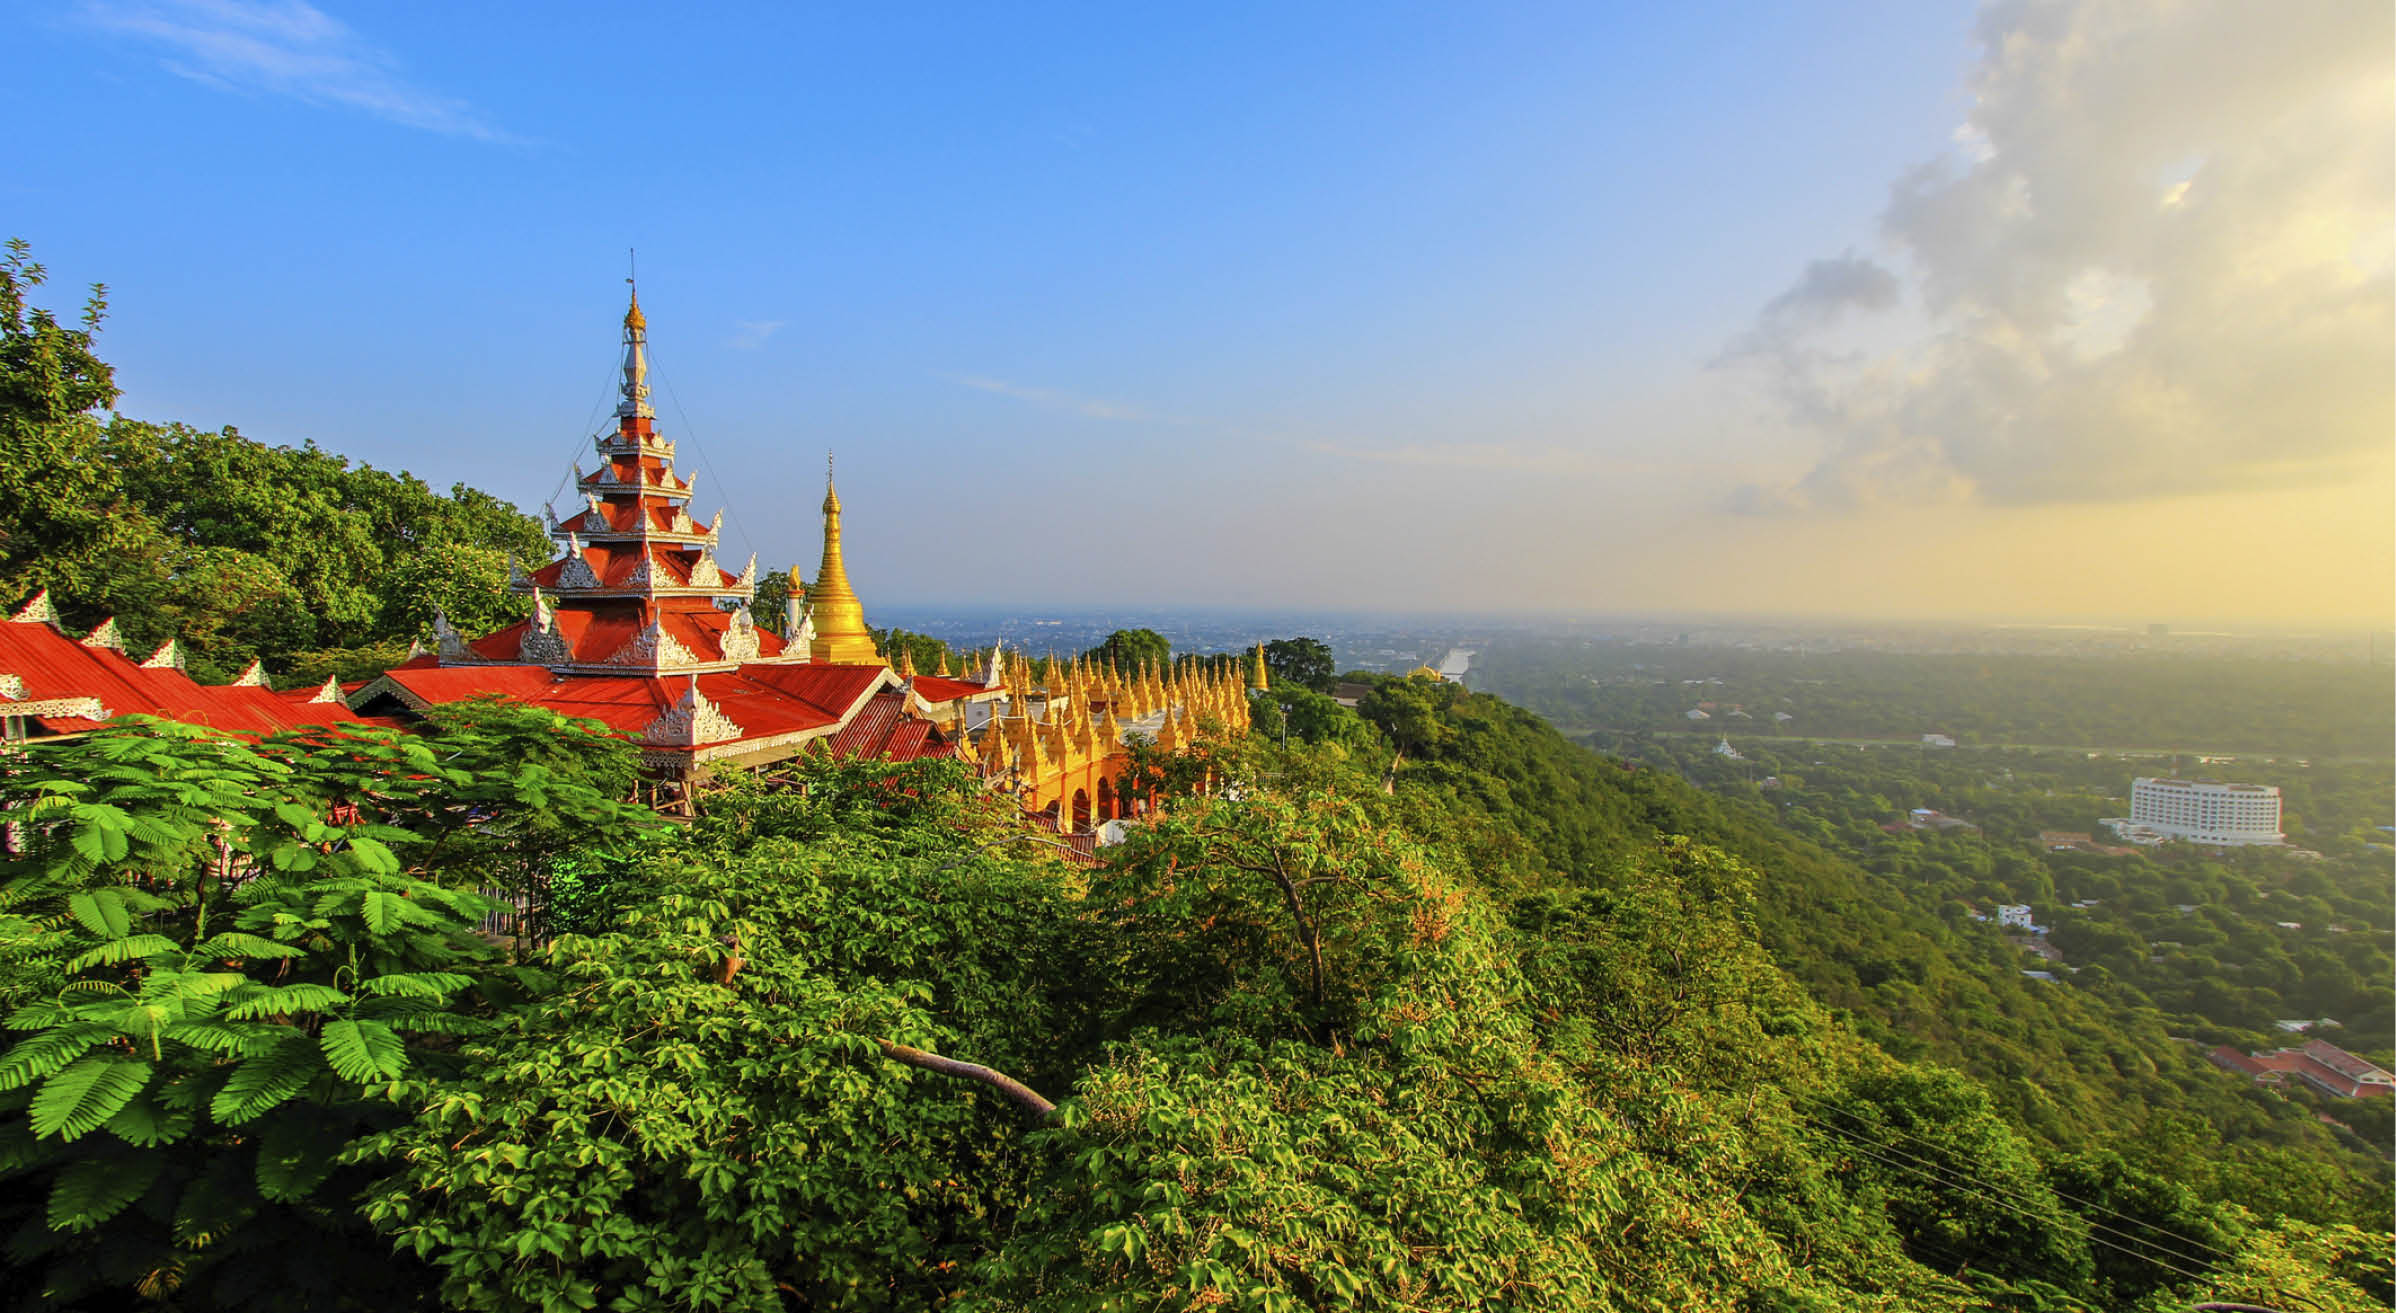 Mandalay Hill is located to the northeast of the city centre of Mandalay in Myanmar,known for its abundance of pagodas and monasteries.